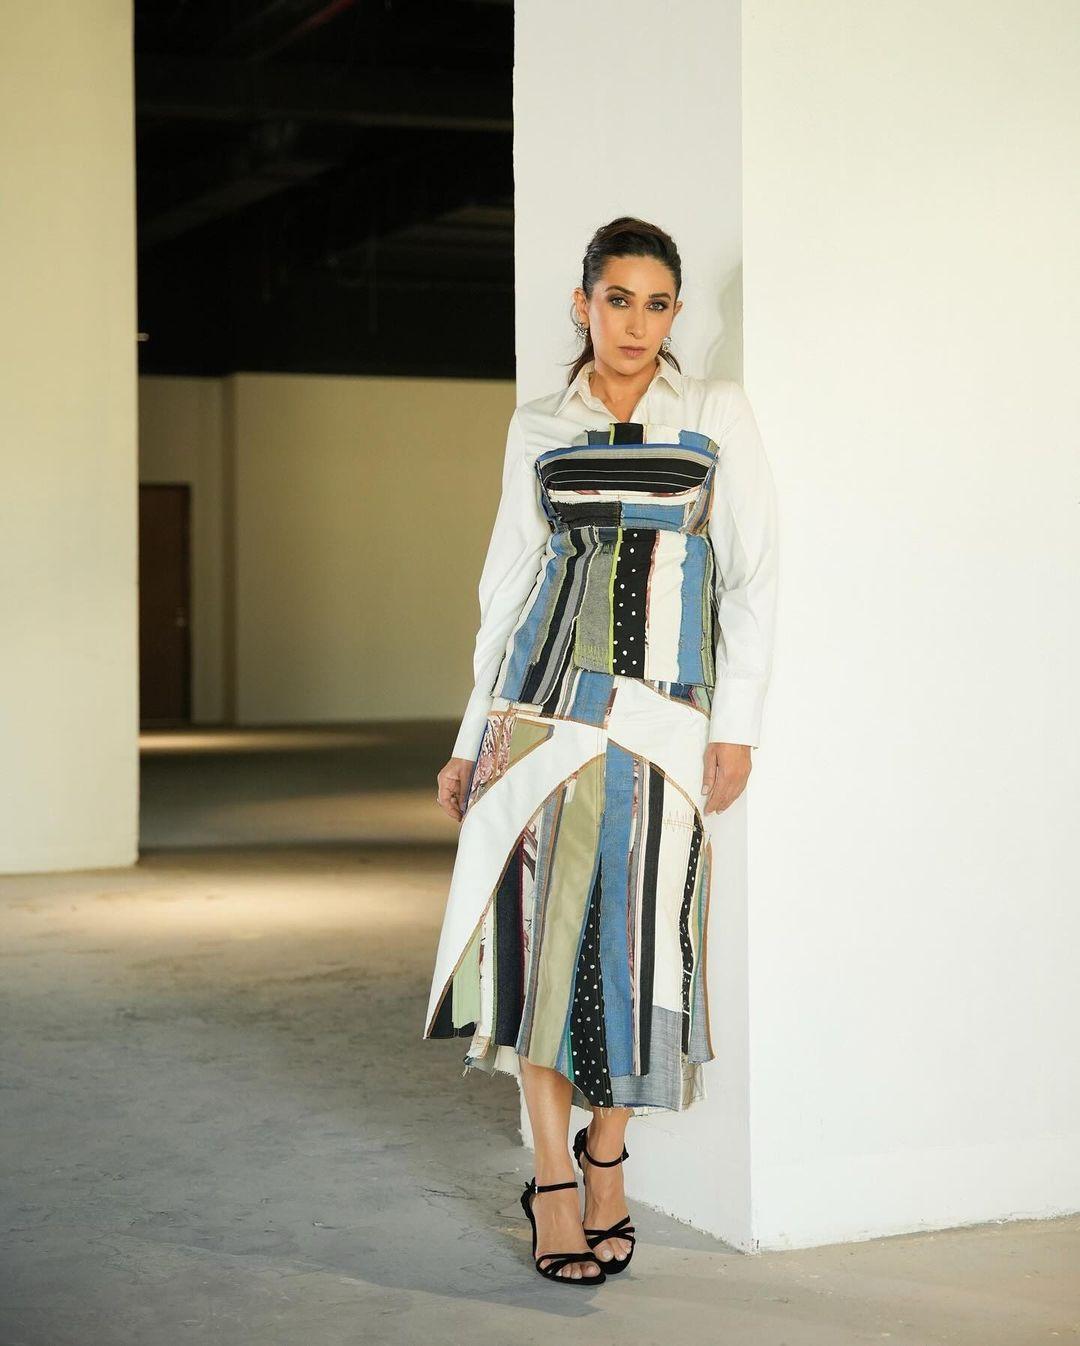 In Karisma Kapoor's outfit from the Fall/Winter 2023 Collection of LEH studios, she wore a bustier top over a white-collared shirt. Both the top and the mid-length skirt were made from leftover fabrics from previous collections, which is ideal for sustainability. 